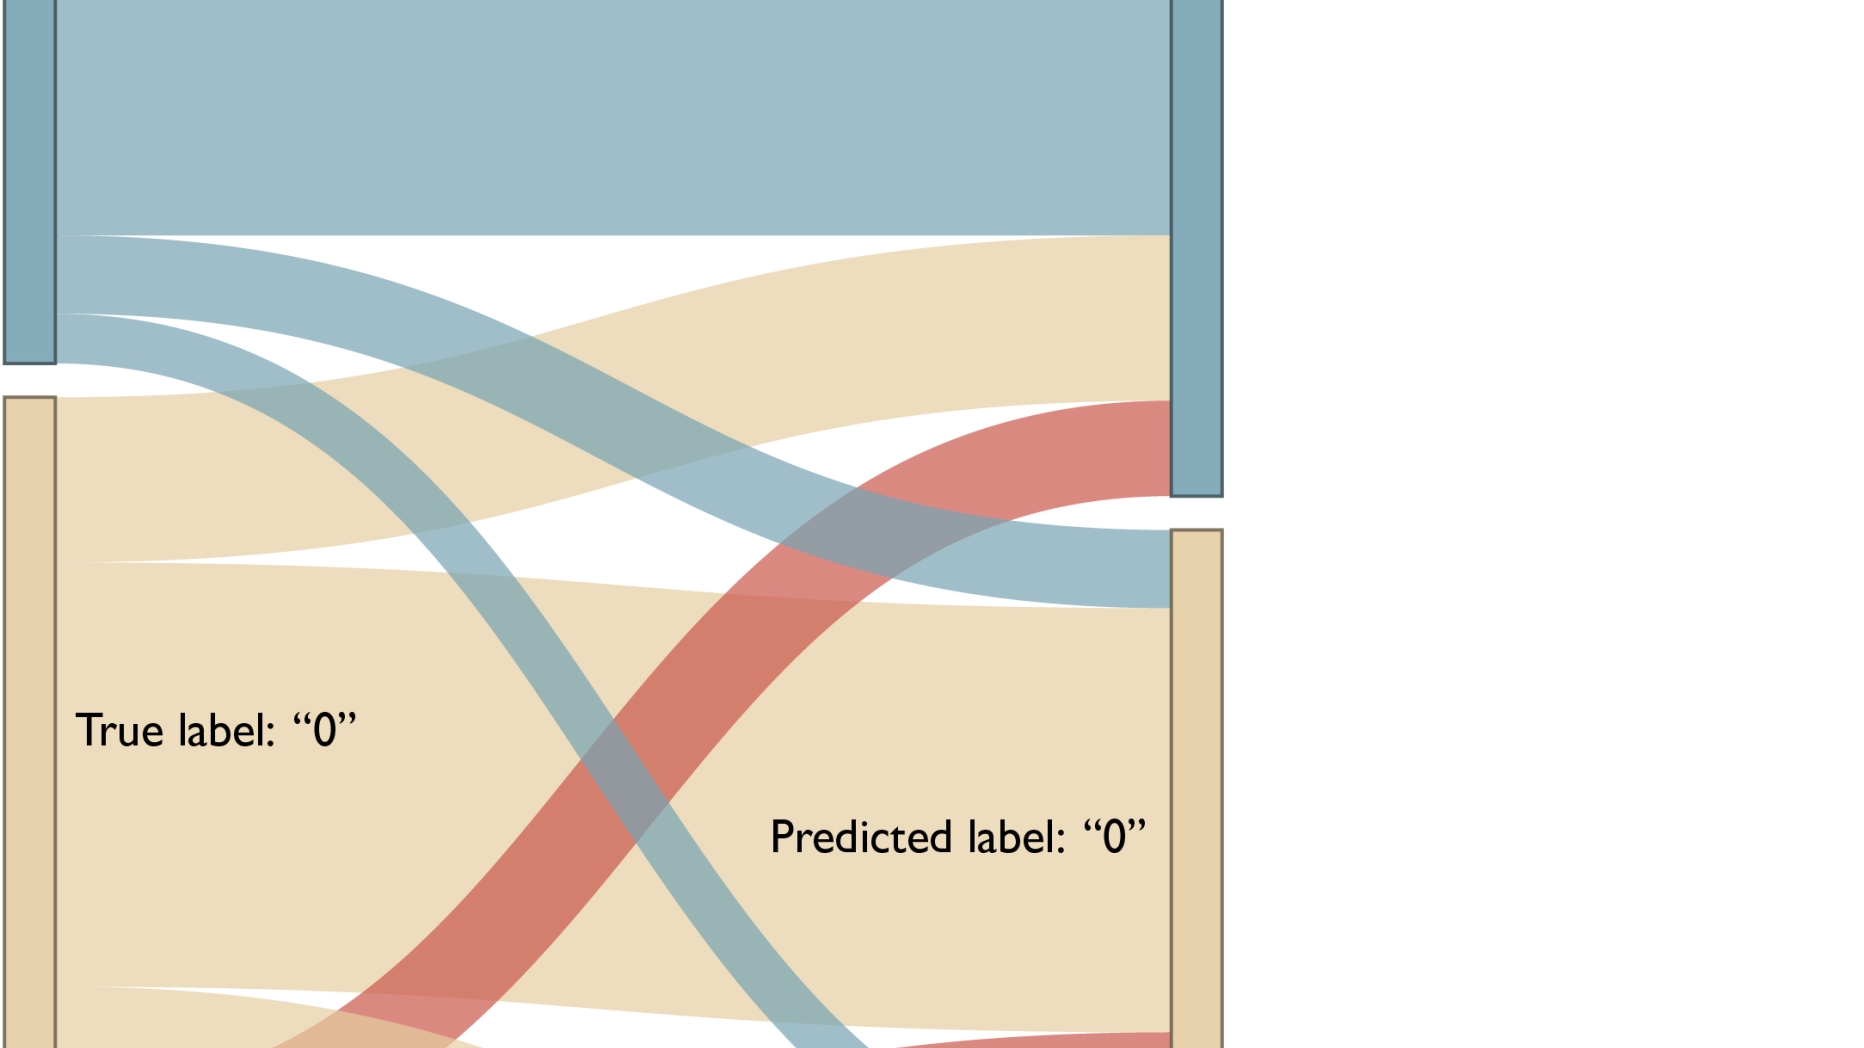 A Sankey plot to depict the number of correct and incorrect predictions classified by the BNN model.